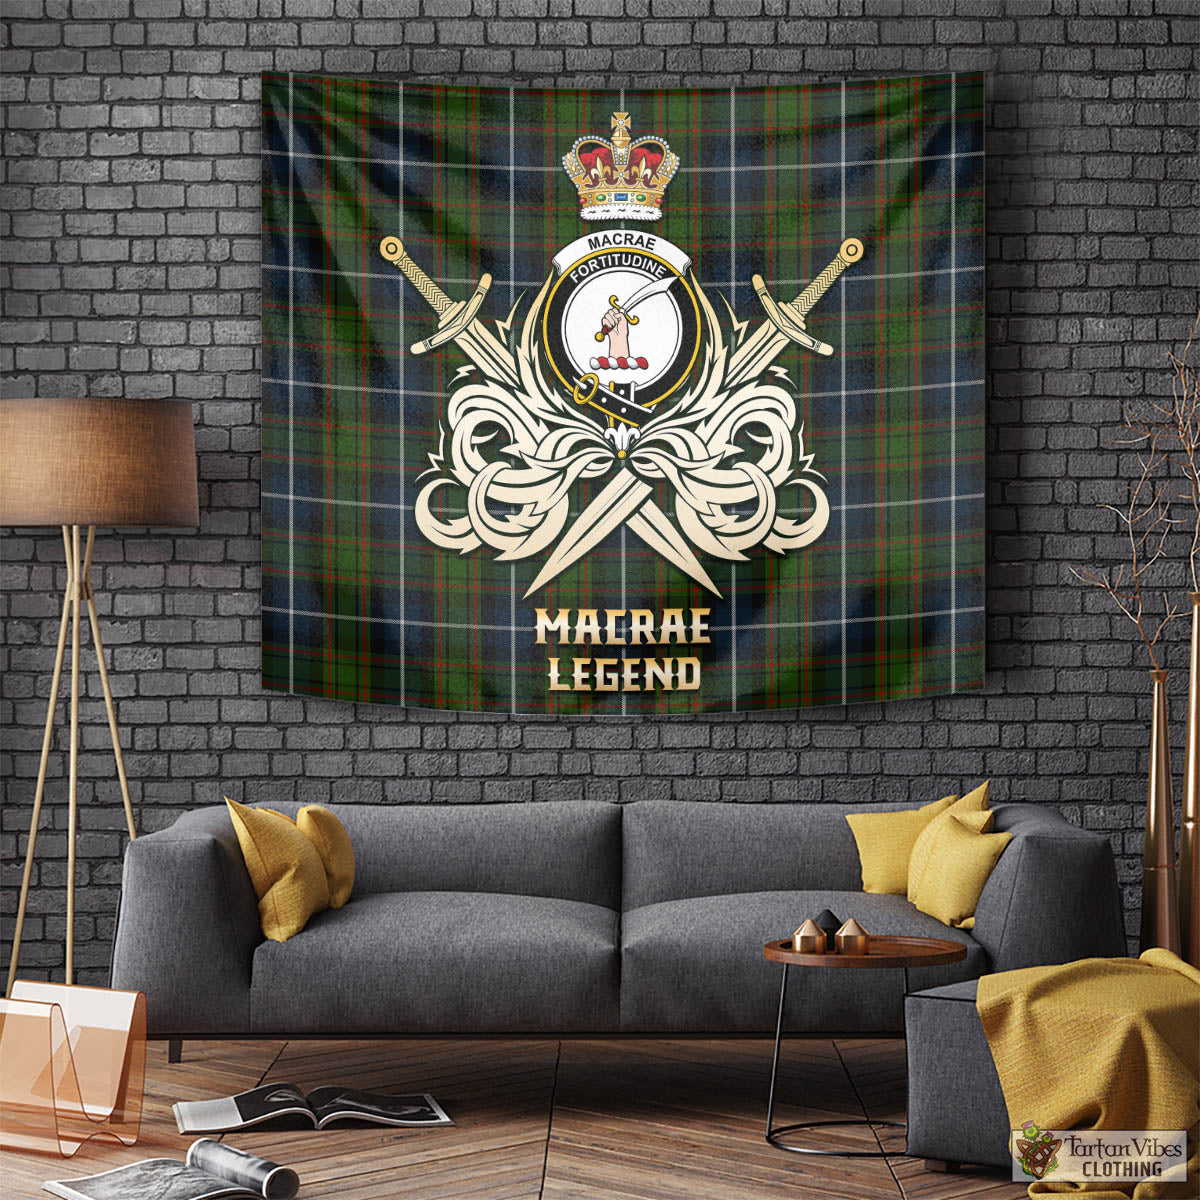 Tartan Vibes Clothing MacRae Hunting Tartan Tapestry with Clan Crest and the Golden Sword of Courageous Legacy